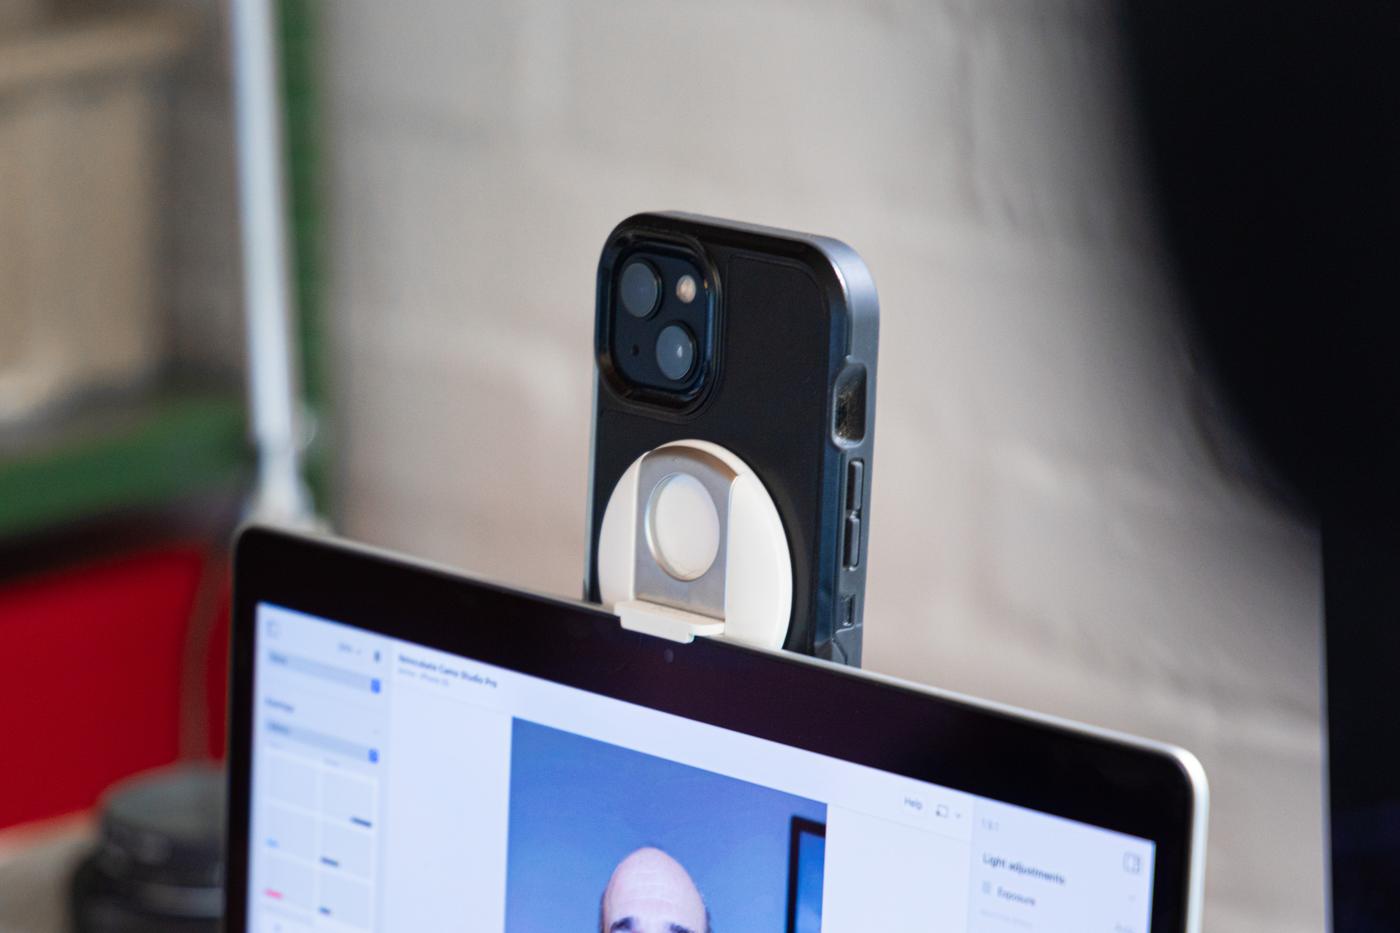 How to mount a phone webcam: which mount is best